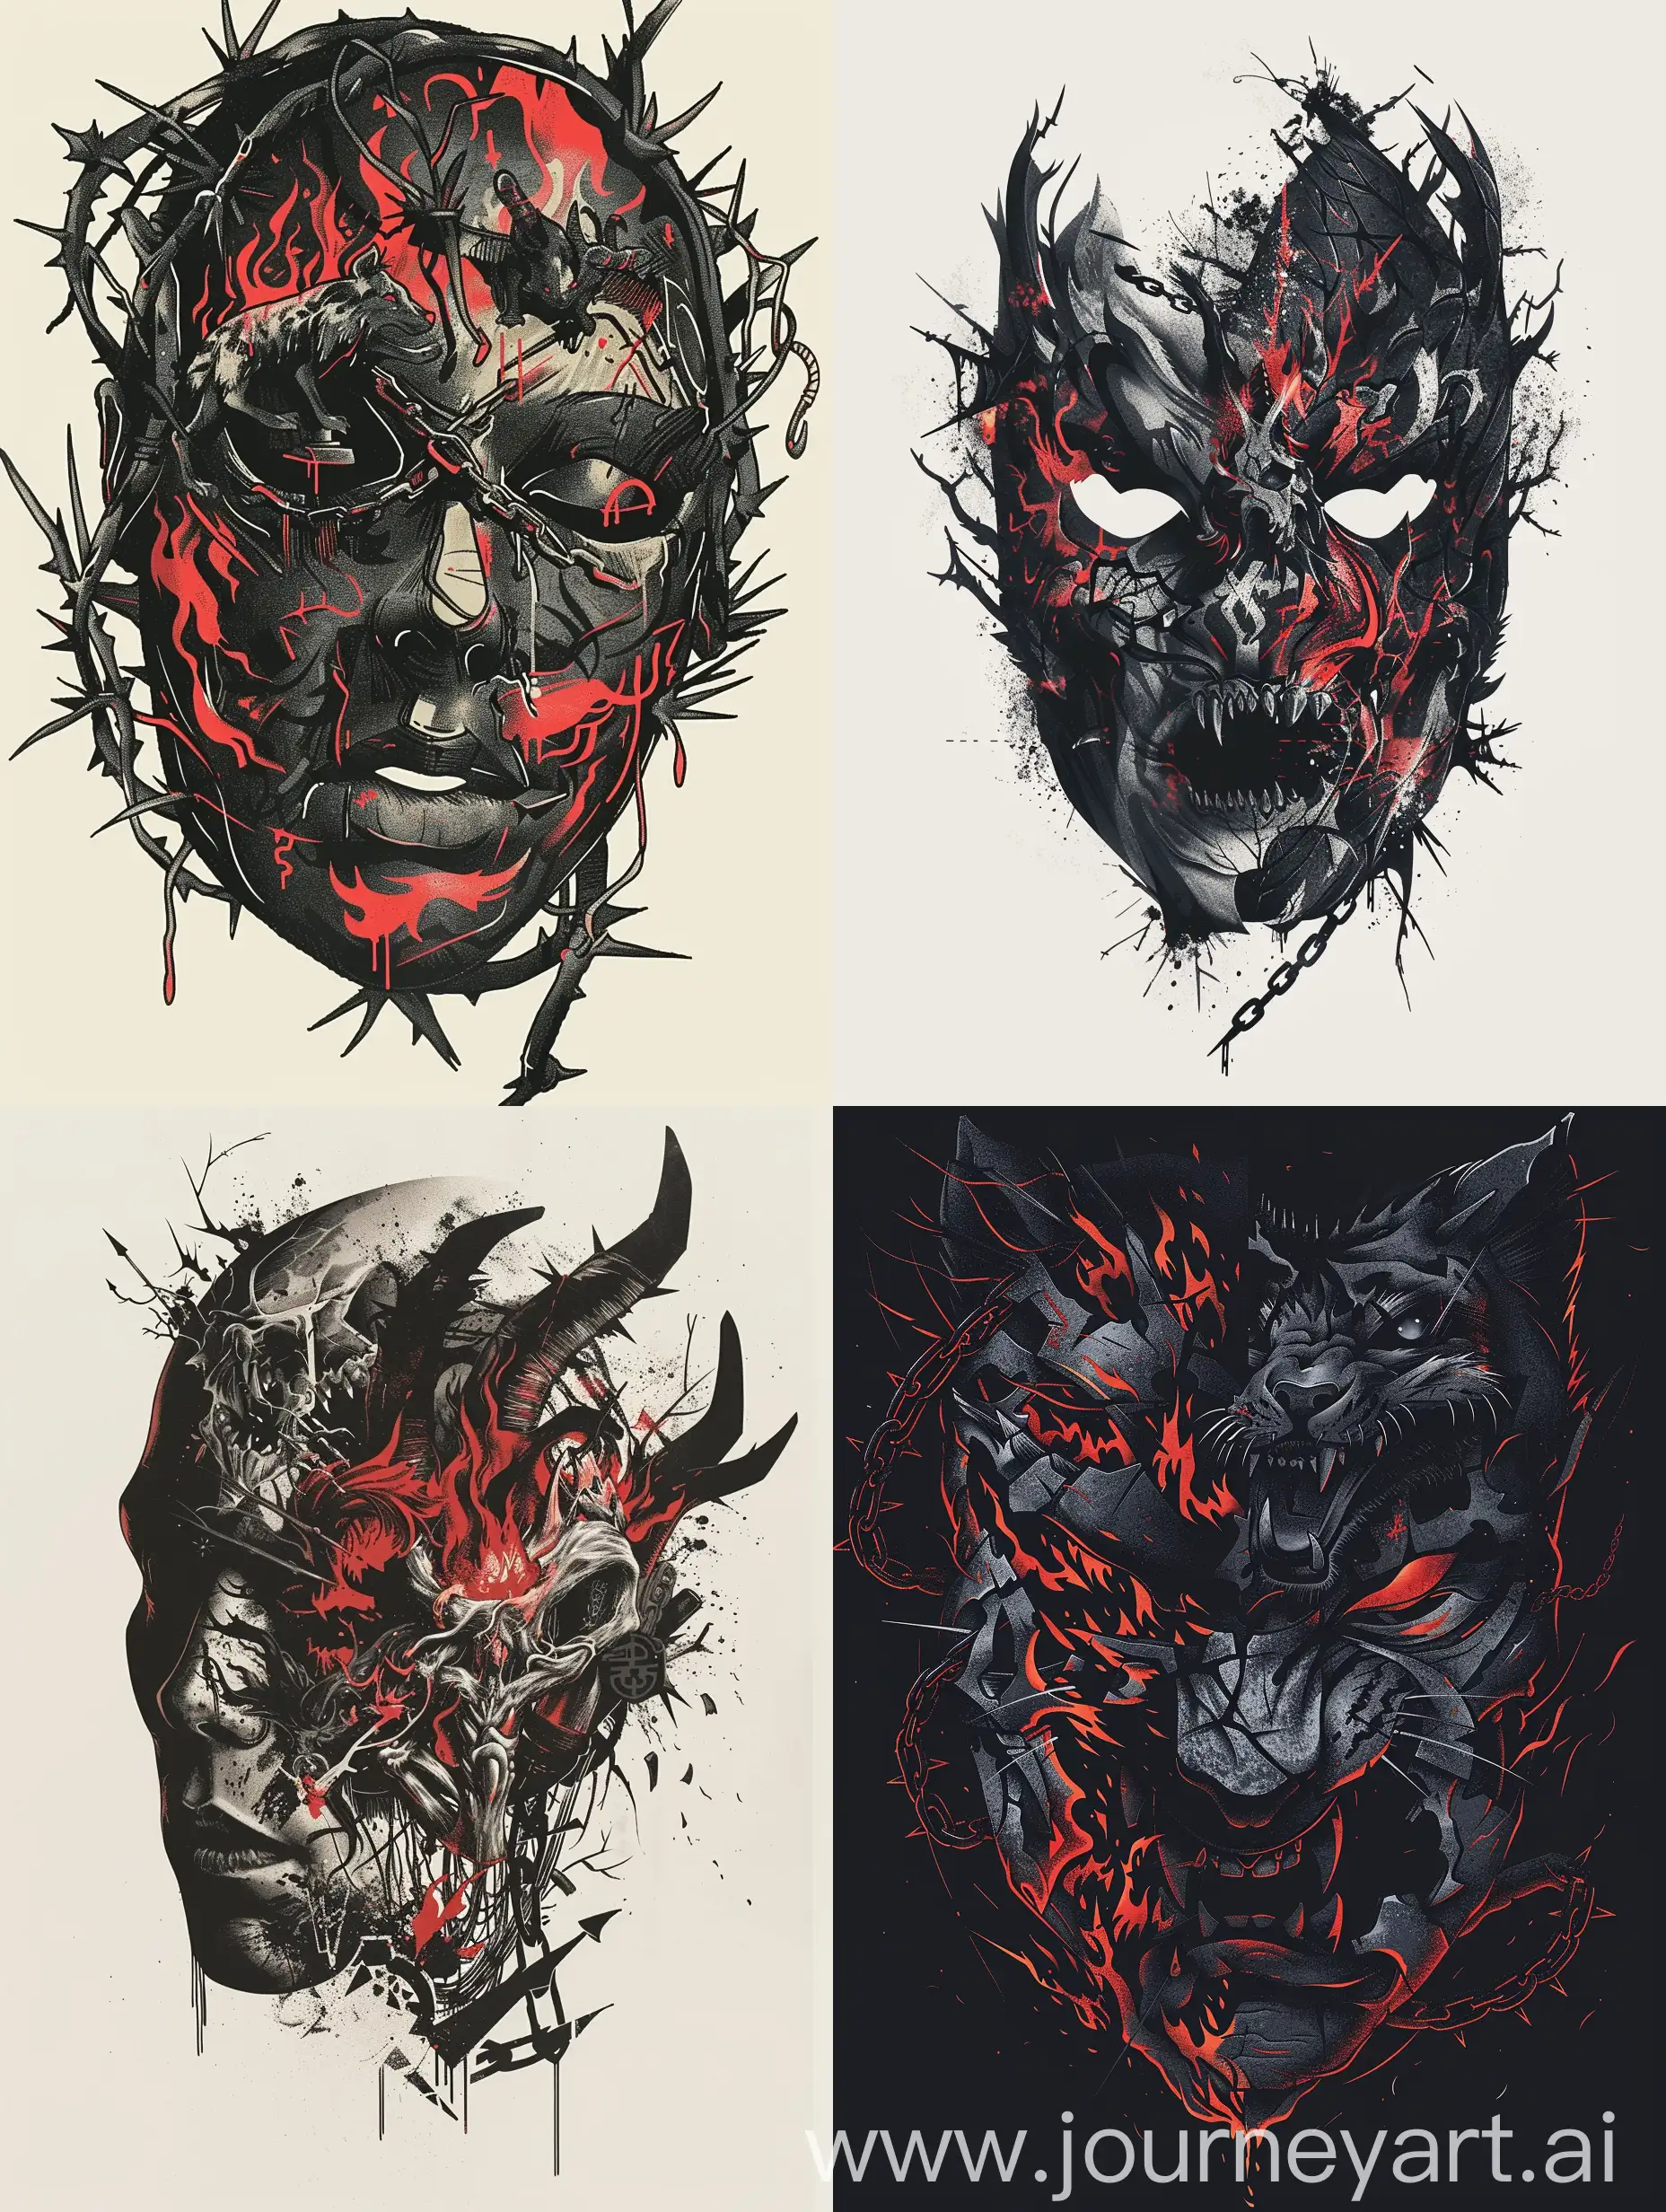 I need a mask design that follows the contours of a human face but appears very fierce. The mask should be primarily in black with red accents and graffiti-style designs. These designs should include aggressive elements like fire, predatory animals, thorns, and broken chains. The mask should retain the shape of human facial features but convey a menacing and intimidating appearance.